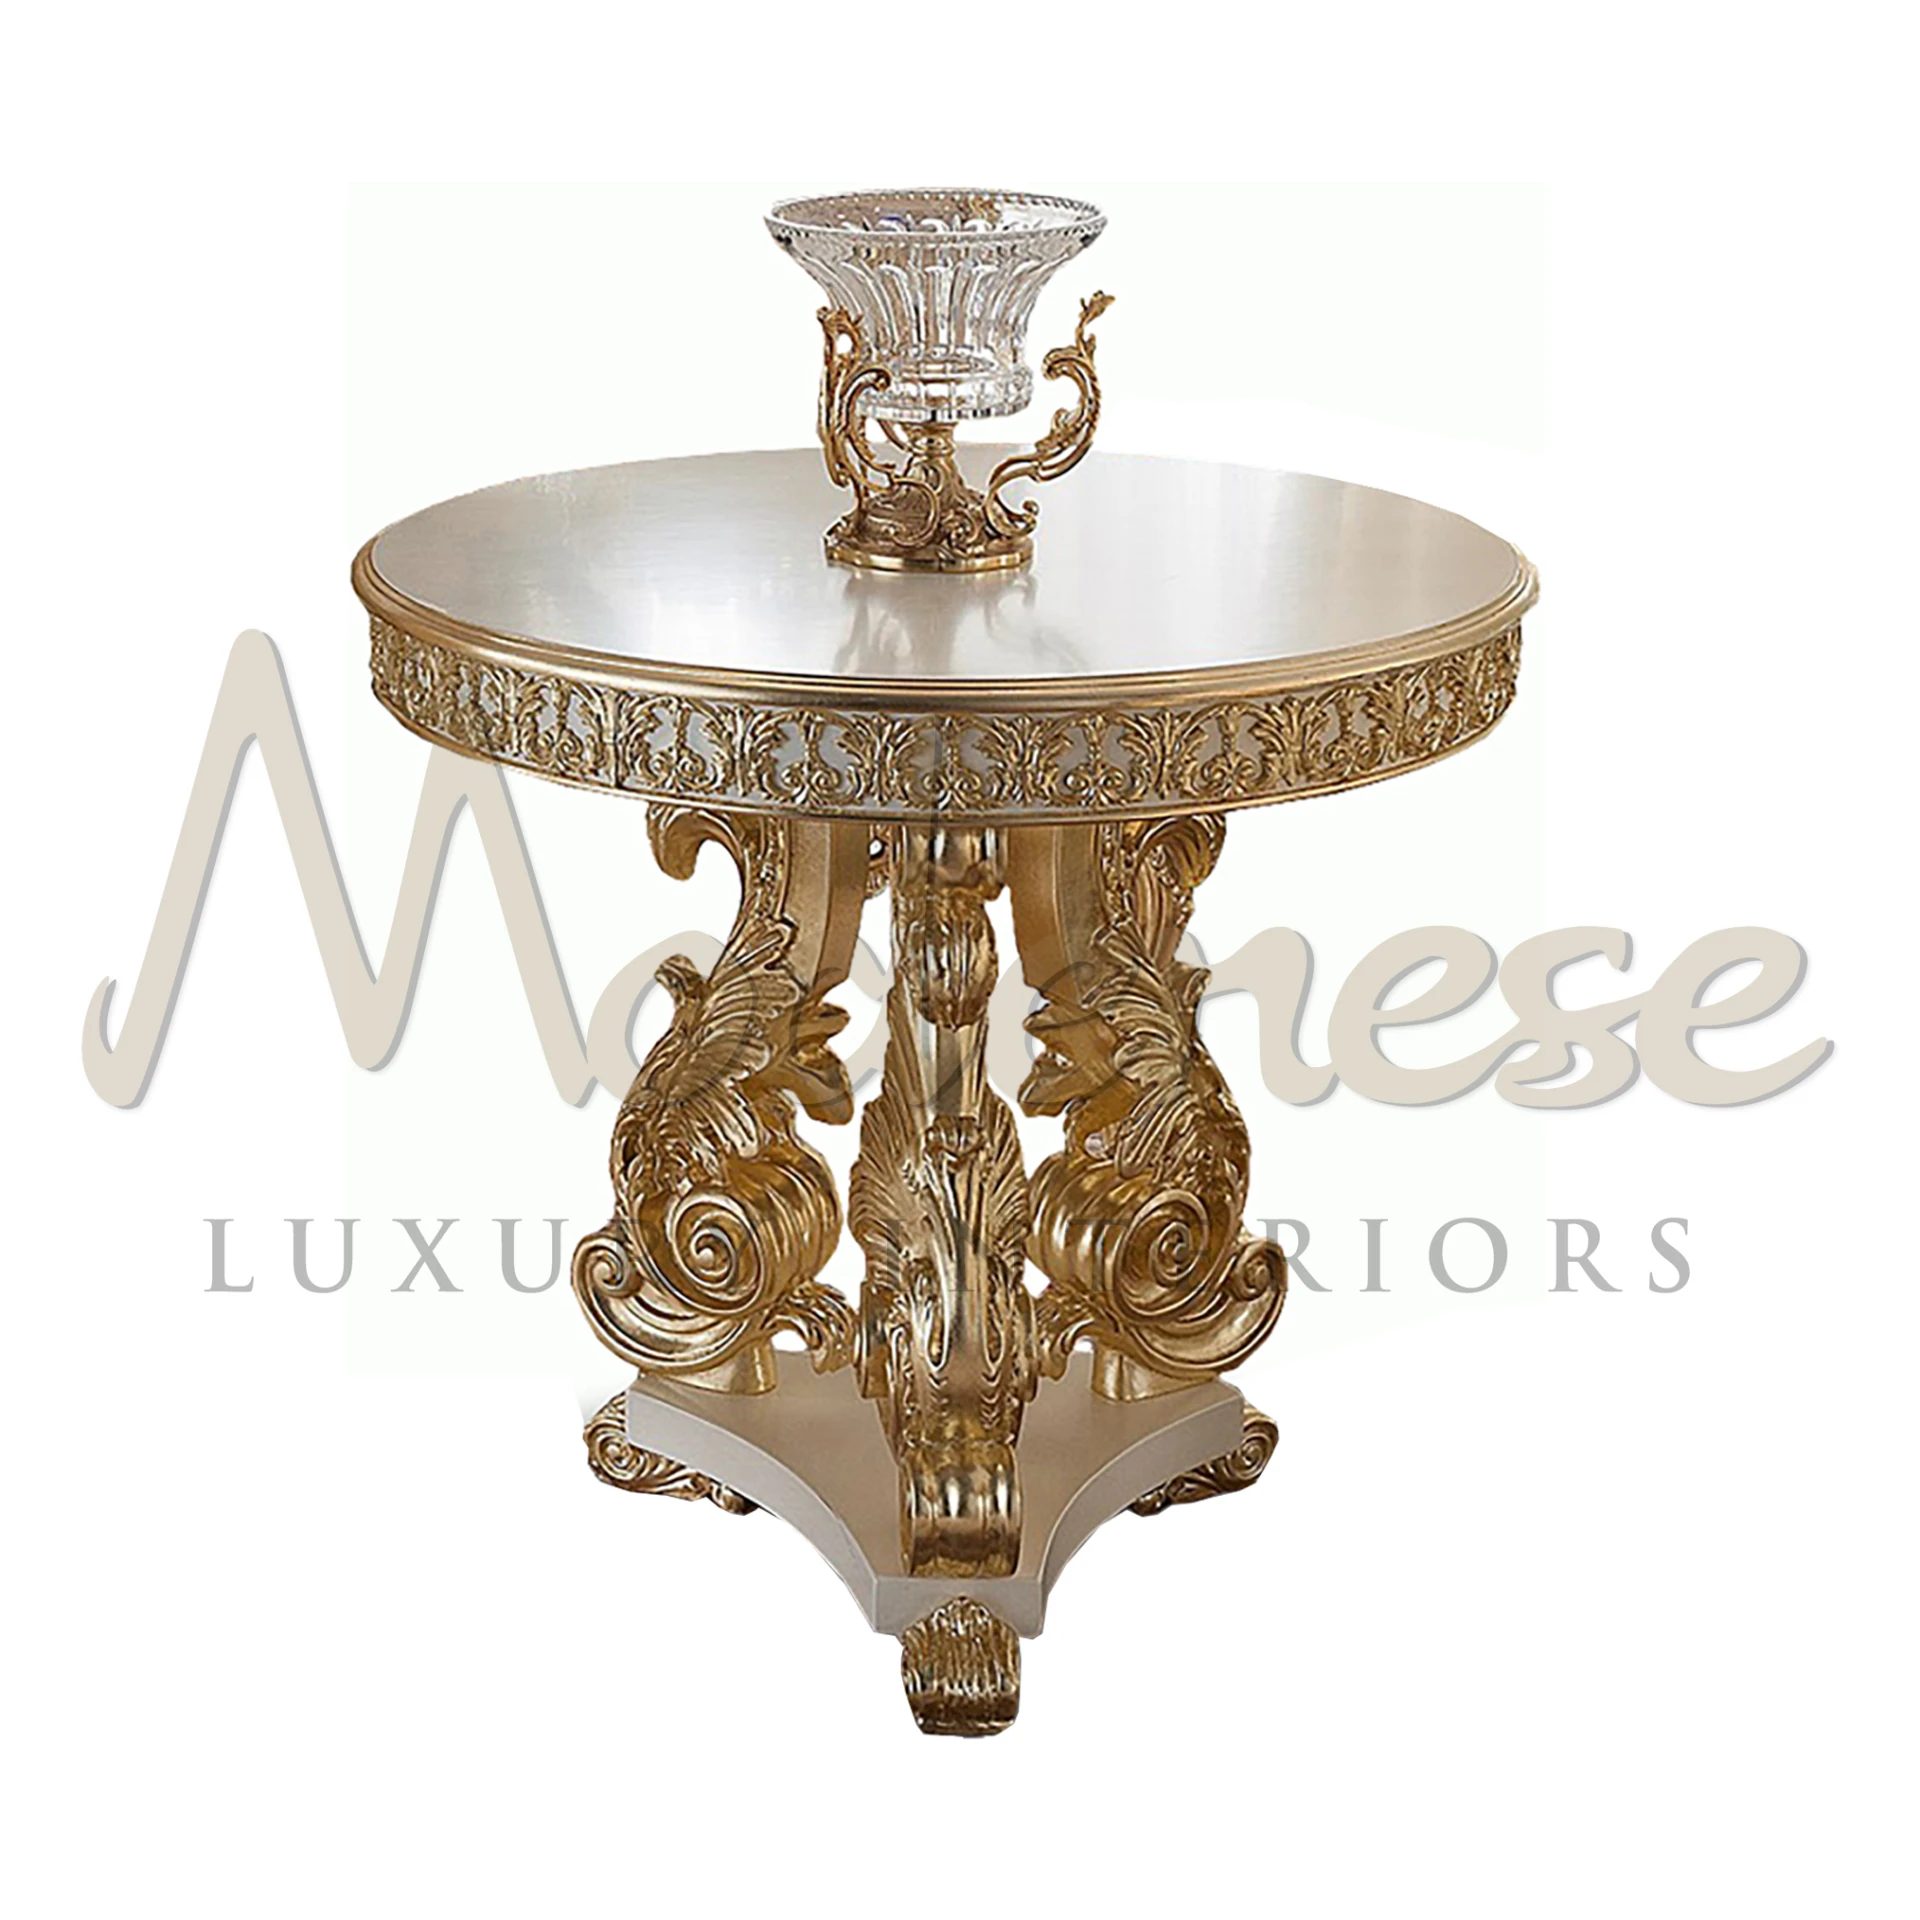 Round Ivory Table with Gold Leaf Embellishments